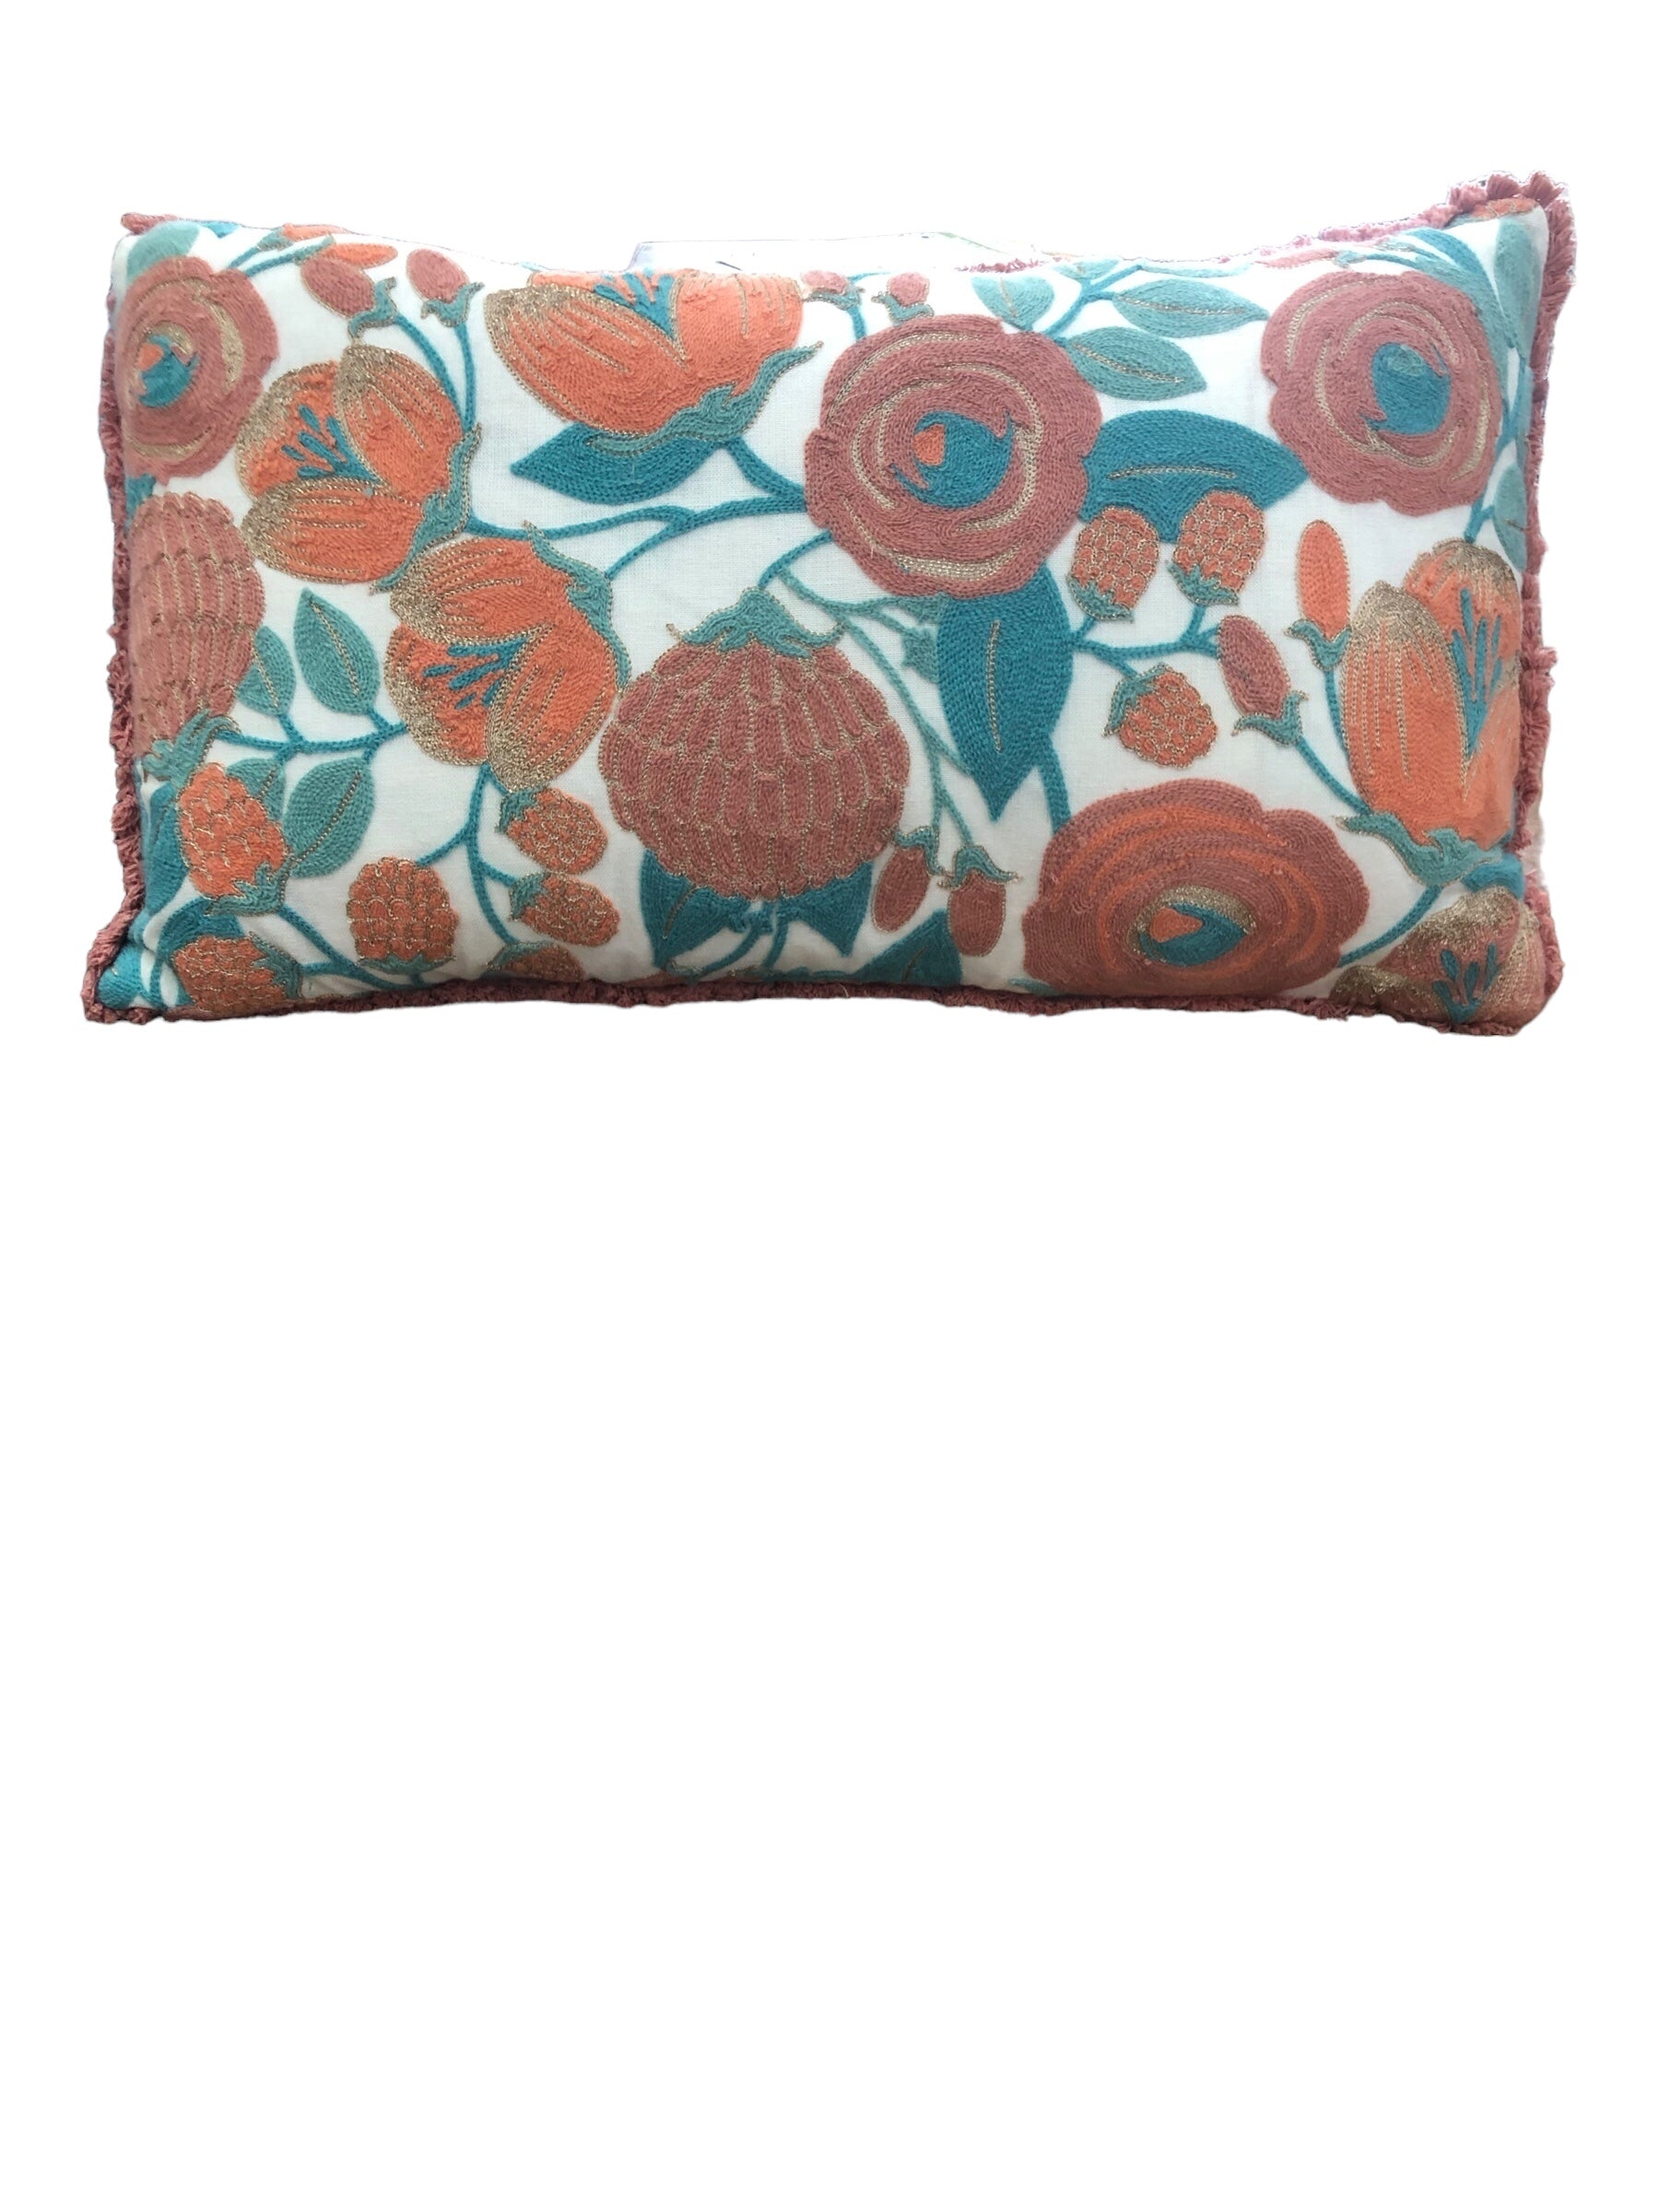 Embroidered Pillow with Orange and Blue